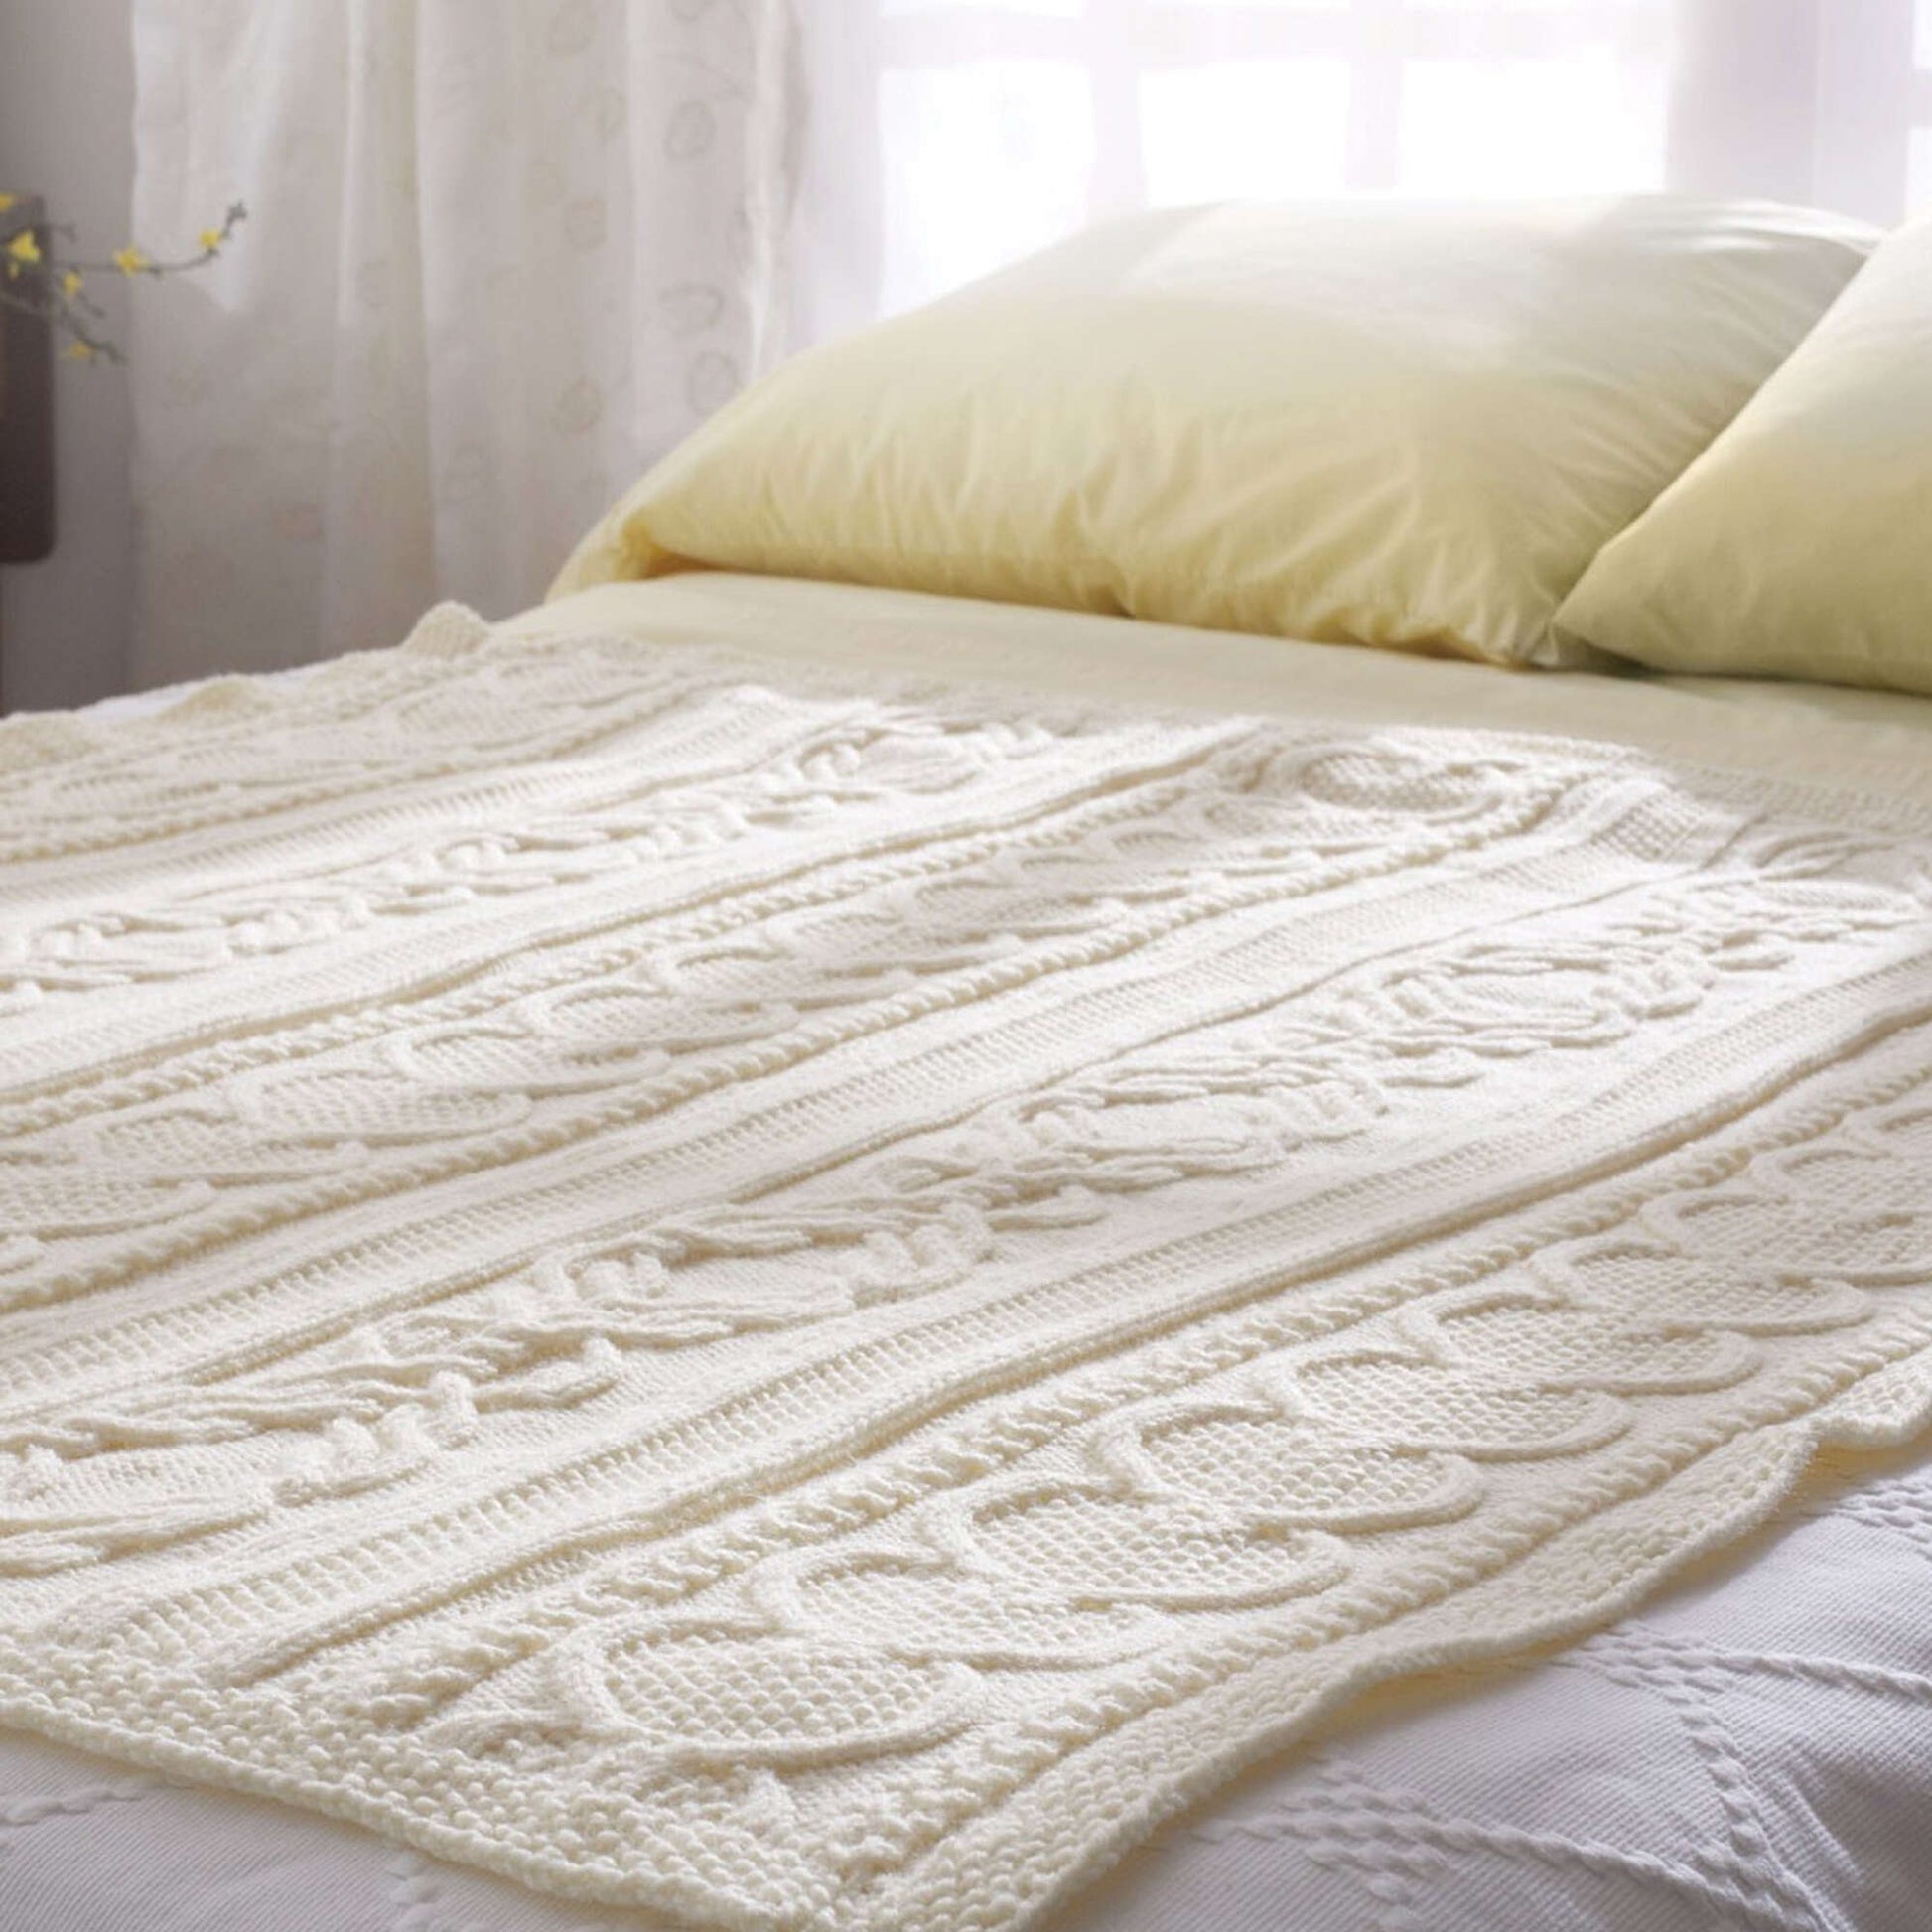 Free Bernat Gift Of Love Cable Afghan Pattern